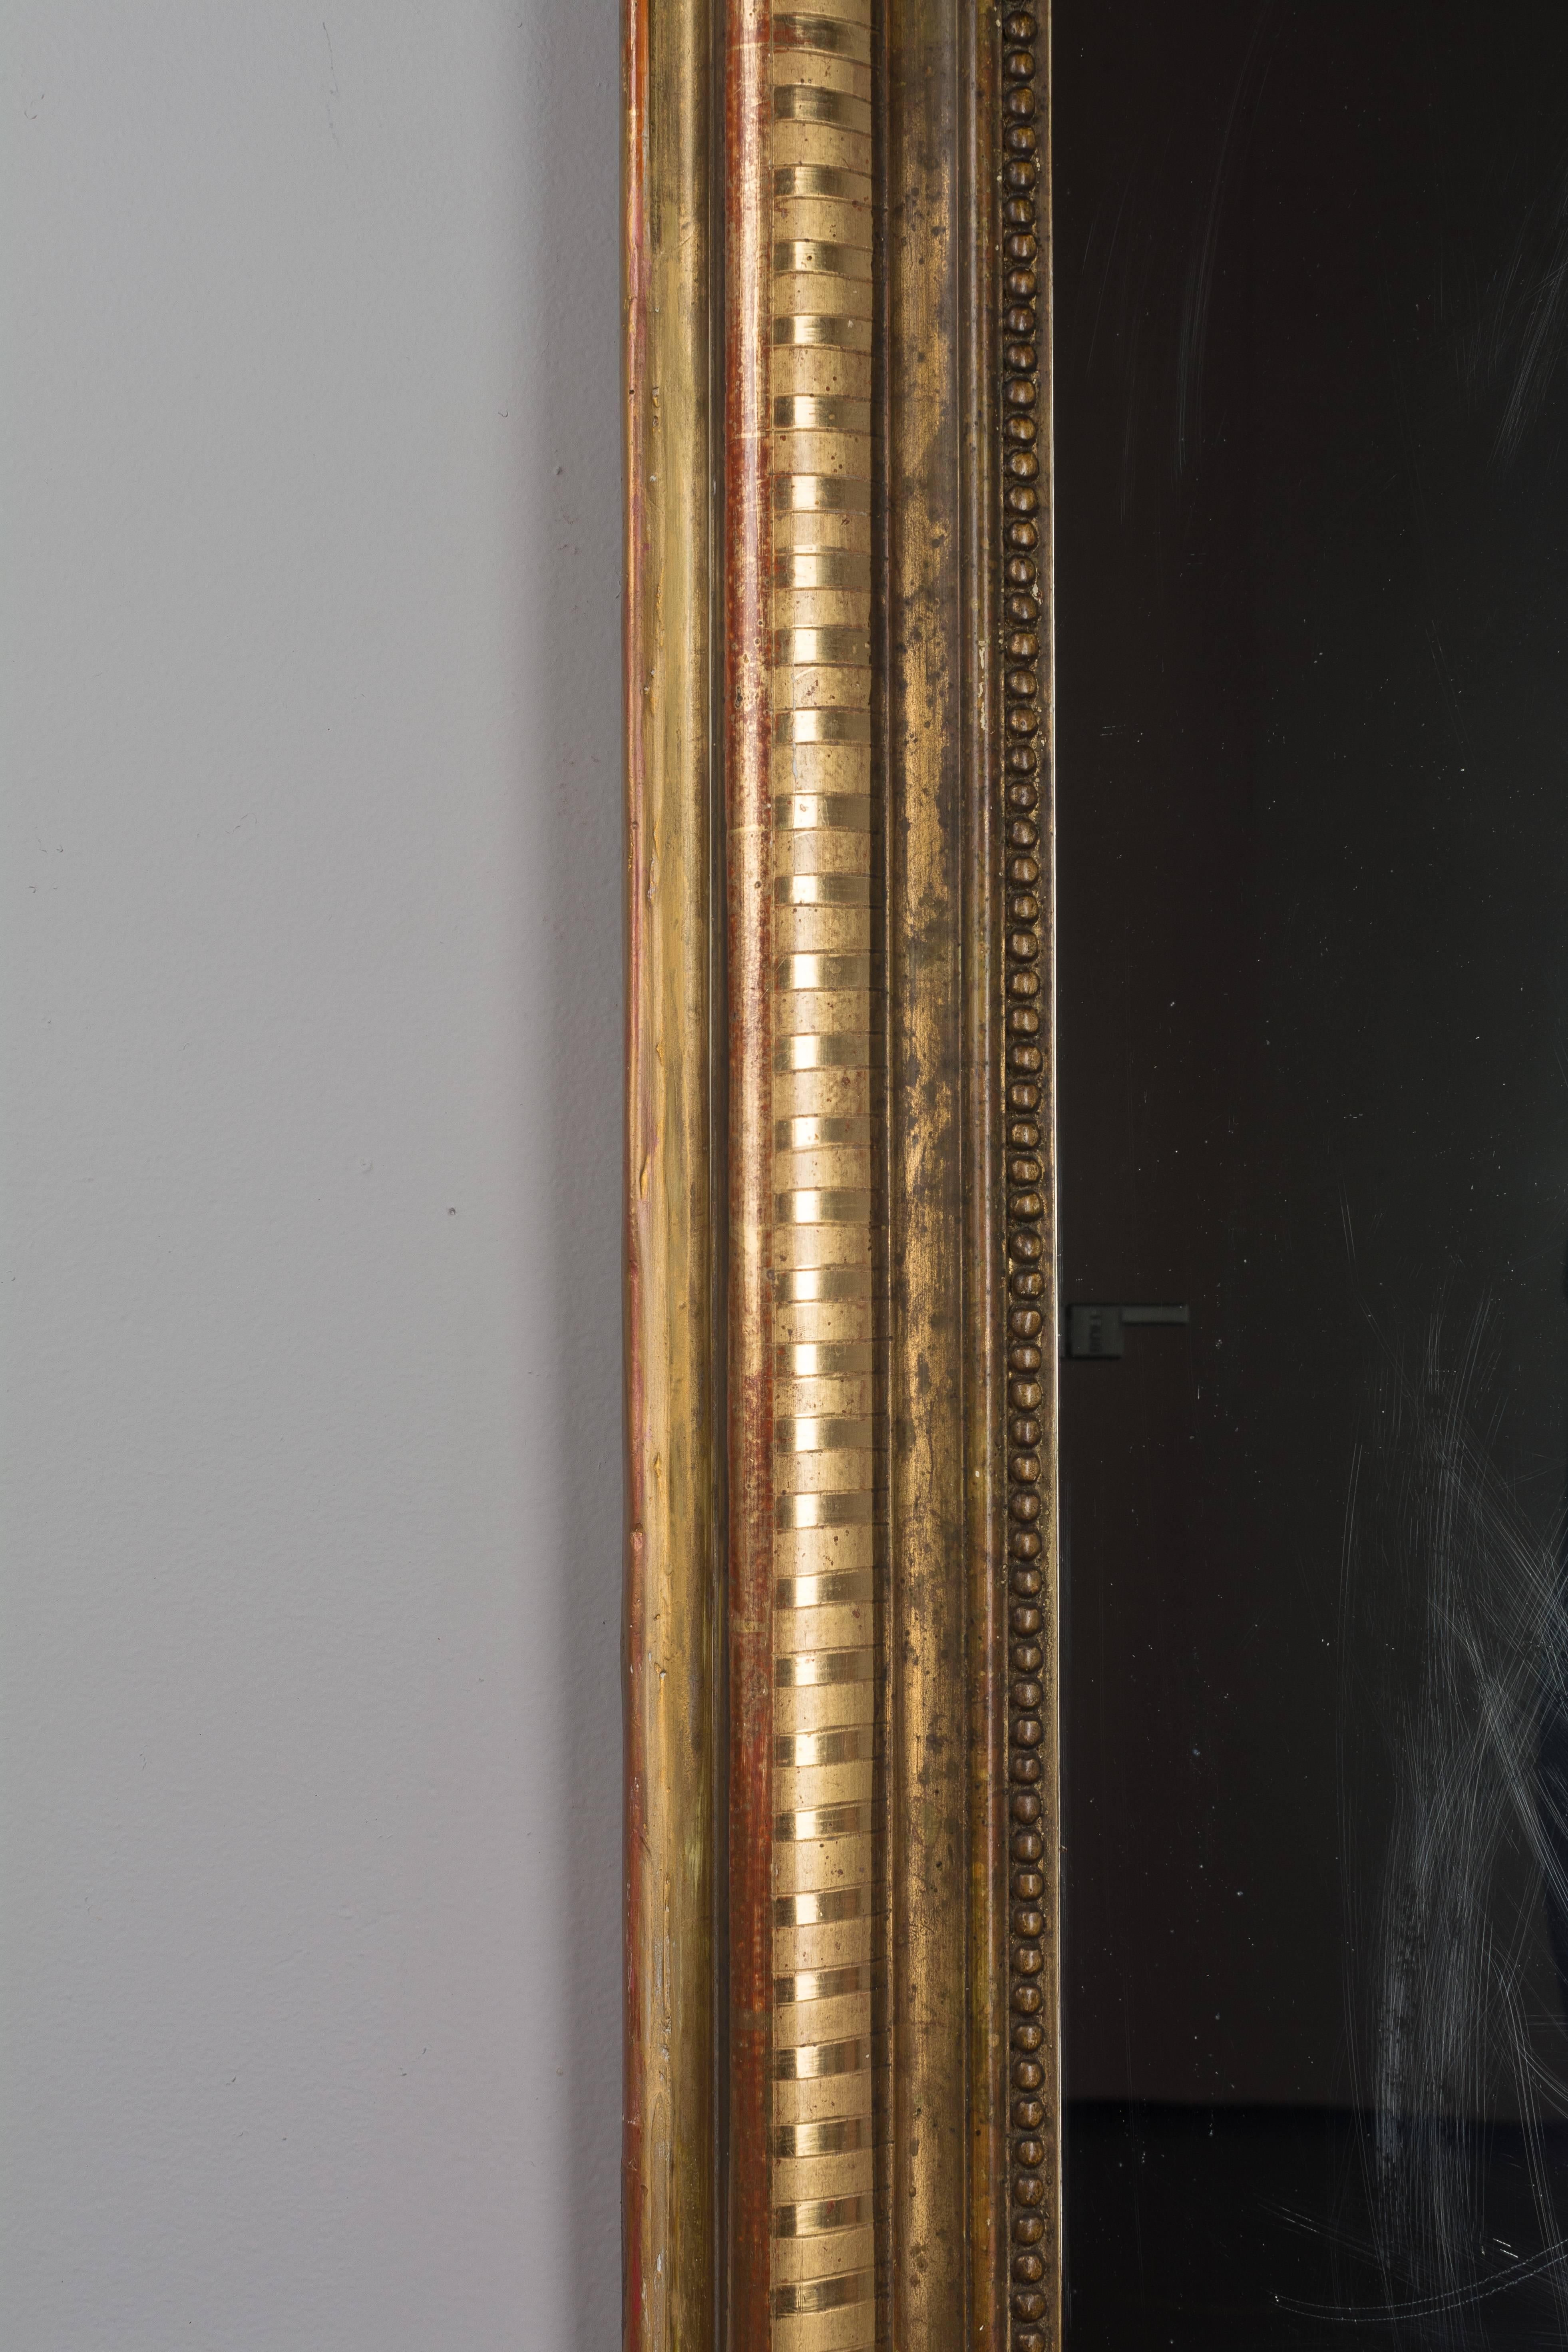 A Louis Philippe giltwood mirror with curved top corners. Warm gilt with ribbed detail. Original mirror with old silvering. Minor loss to gilt and small restorations on edge. Mirror is scratched. Please refer to photos for more details. We have a